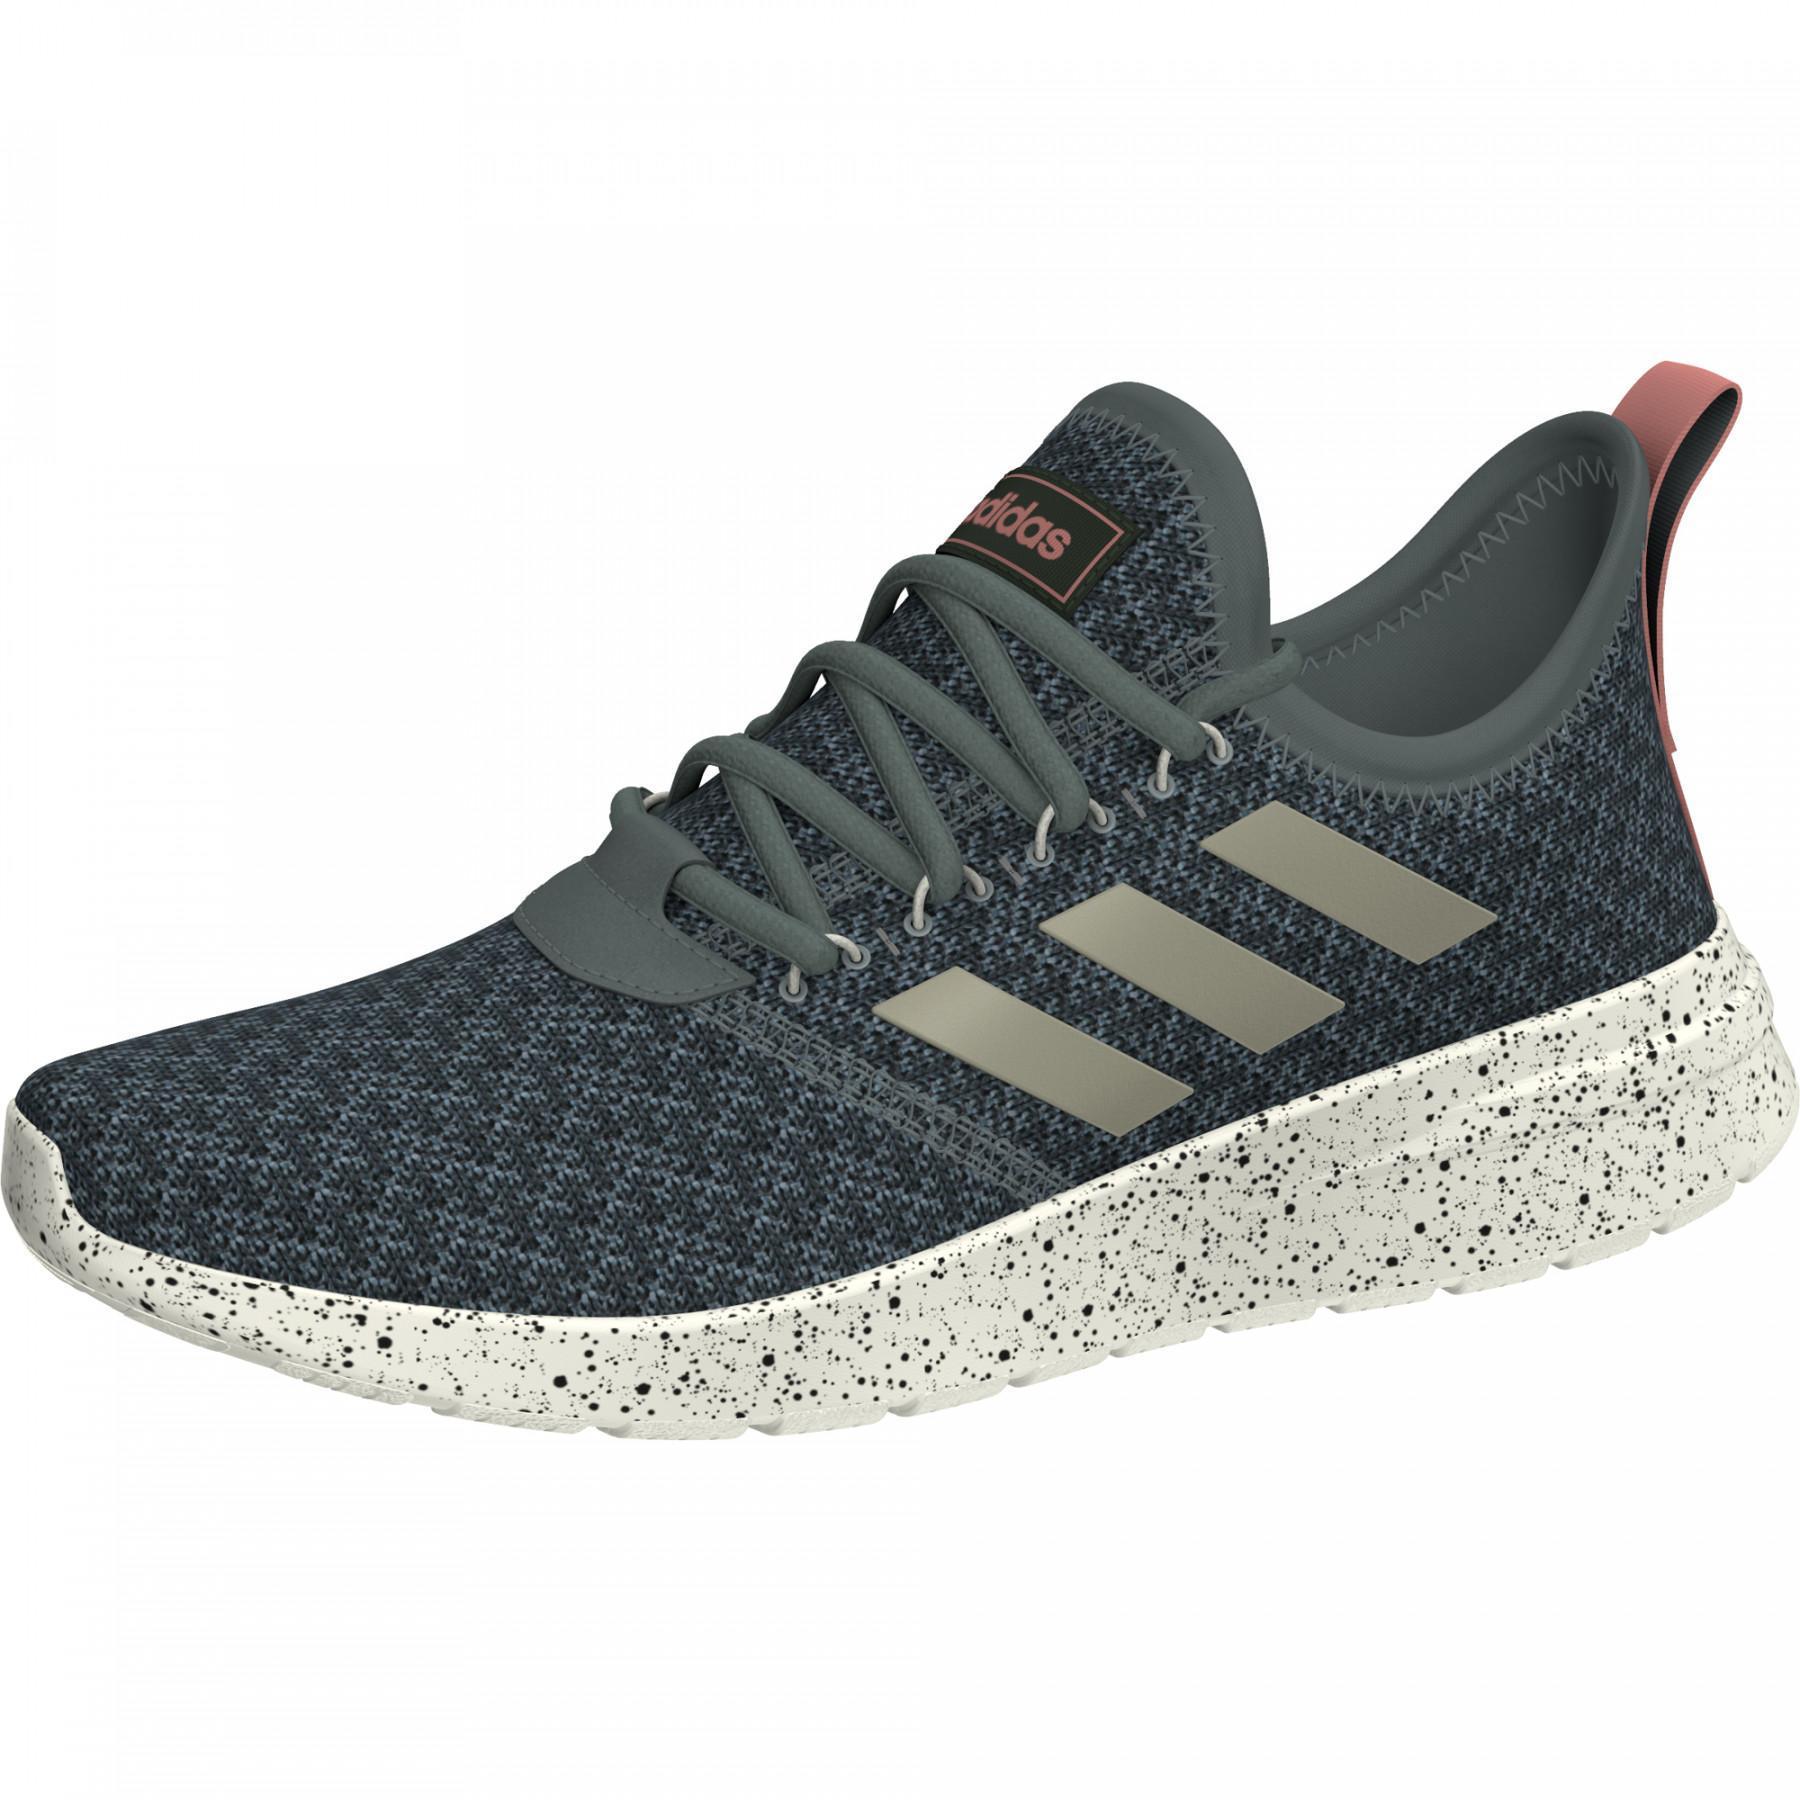 Women's shoes adidas Lite Racer RBN